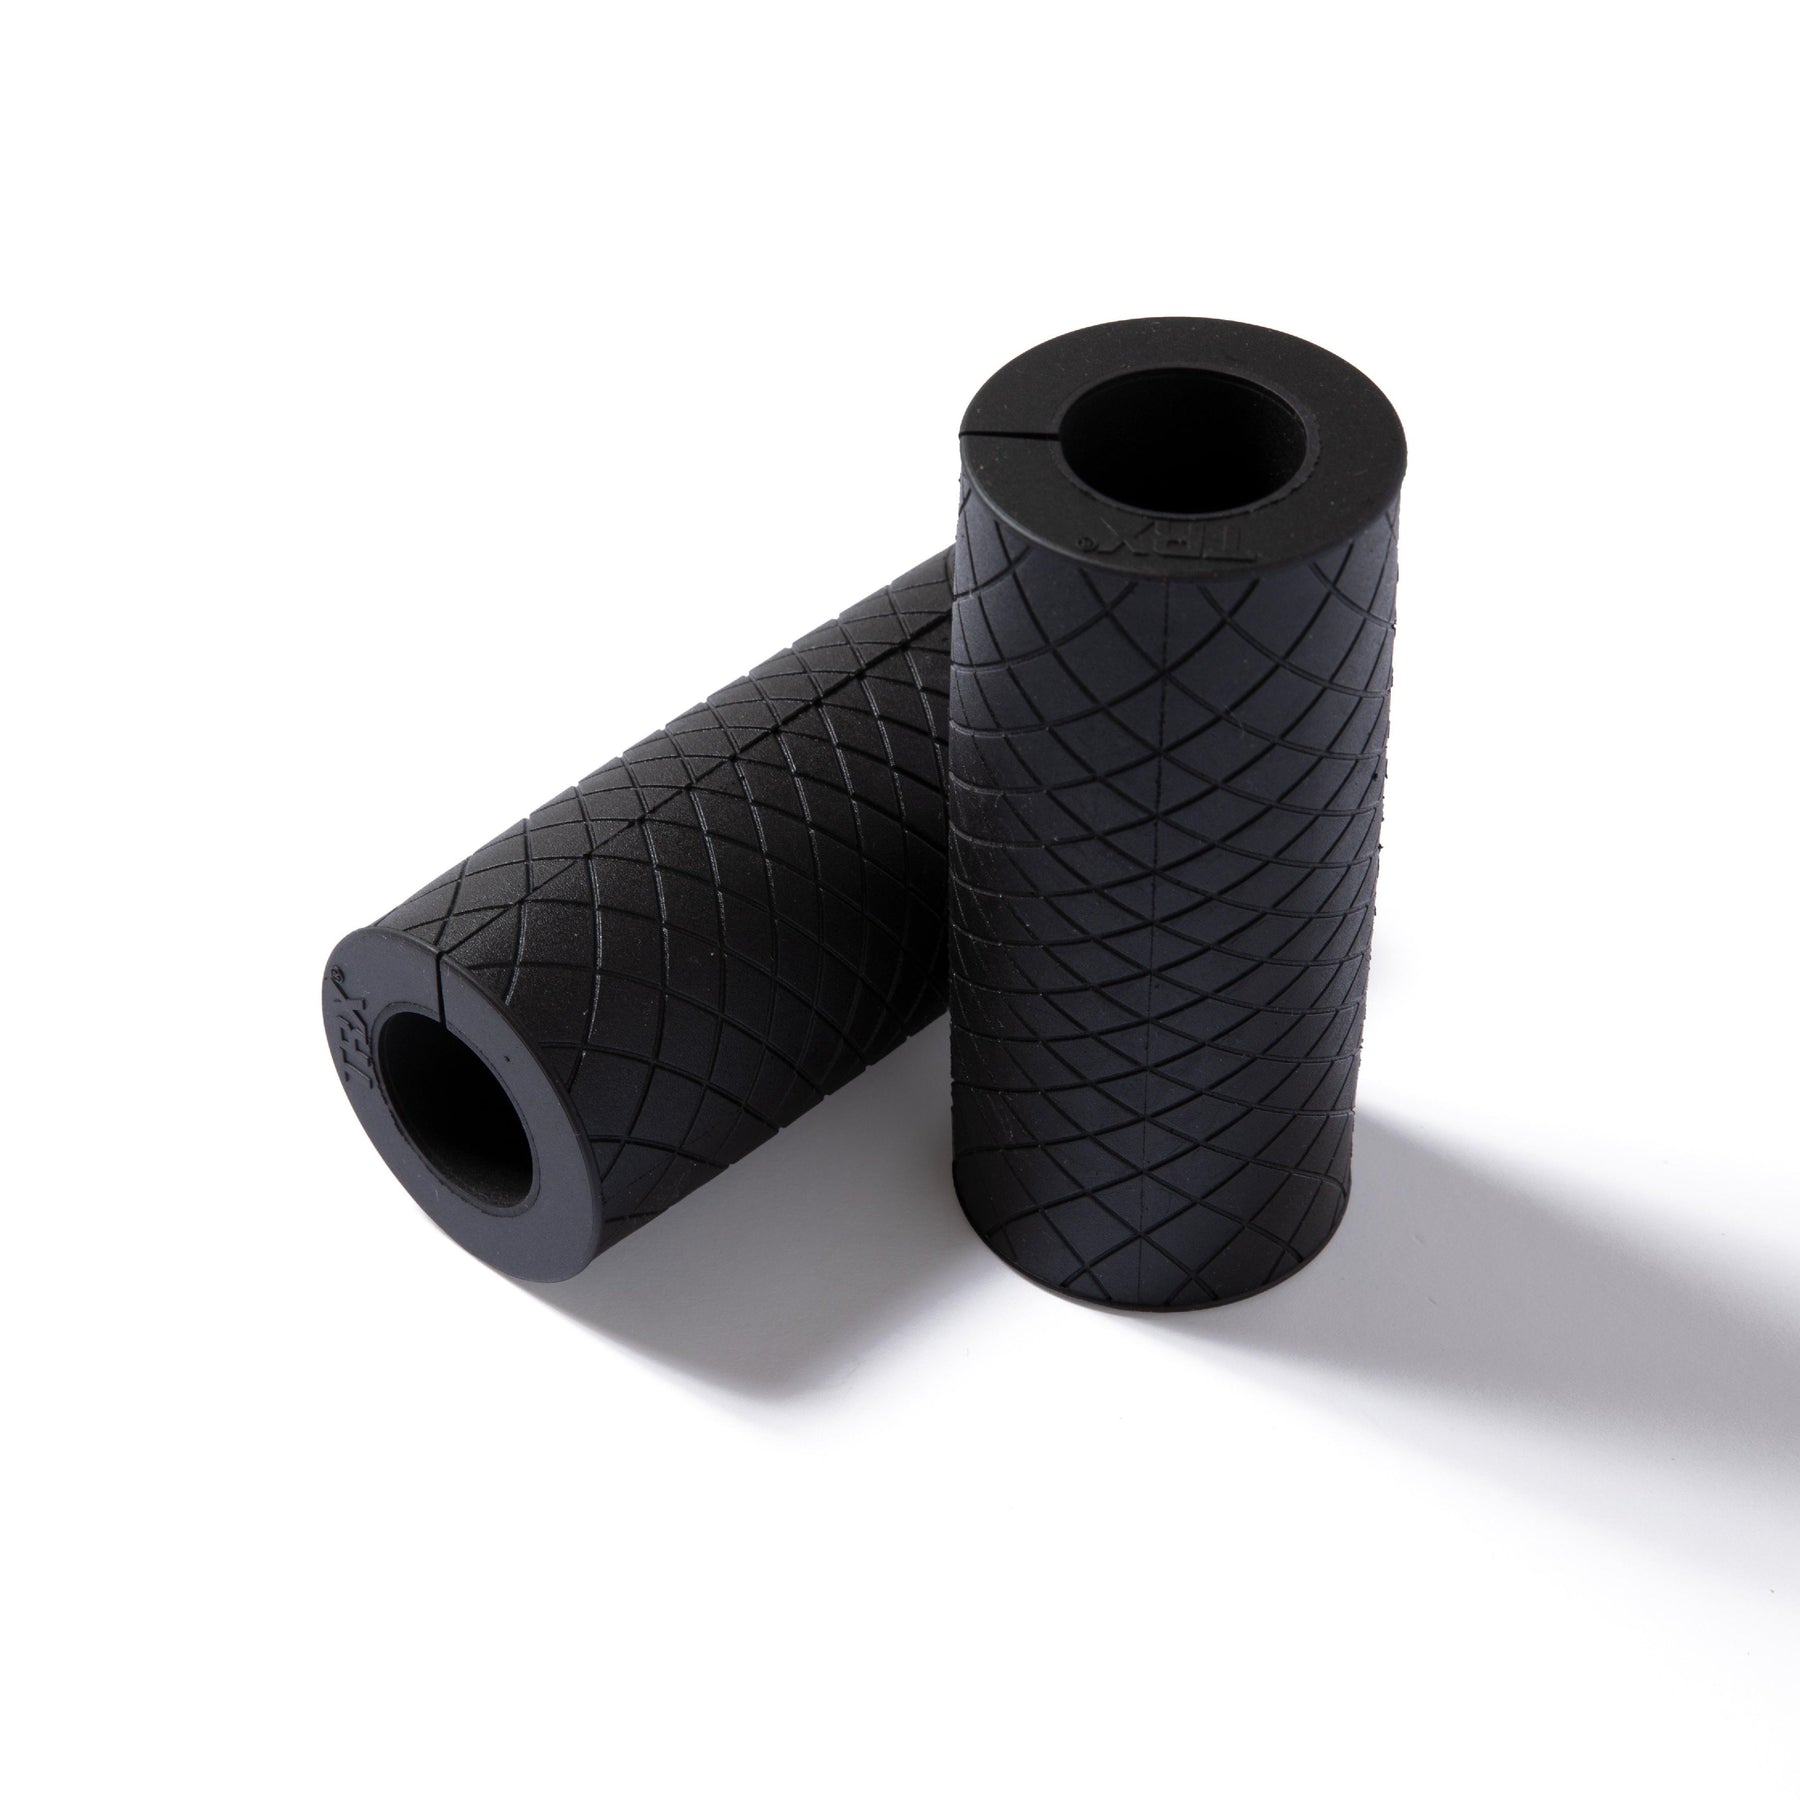 TRX Thick Grips - Commercial Partners